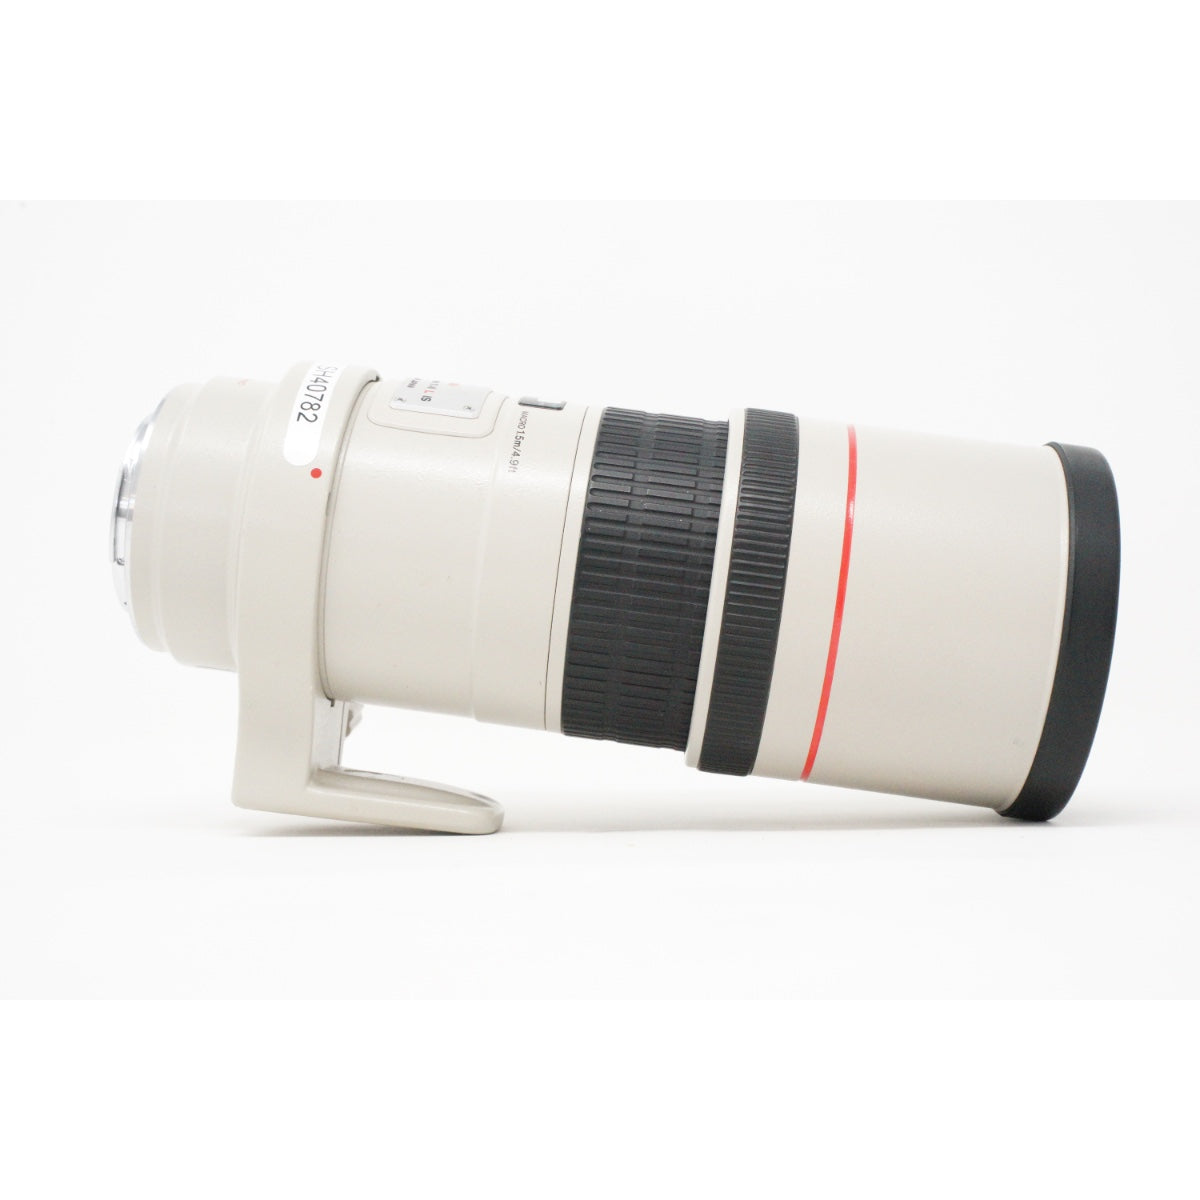 USED Canon EF 300mm f4 L IS USM Image Stabilising Lens